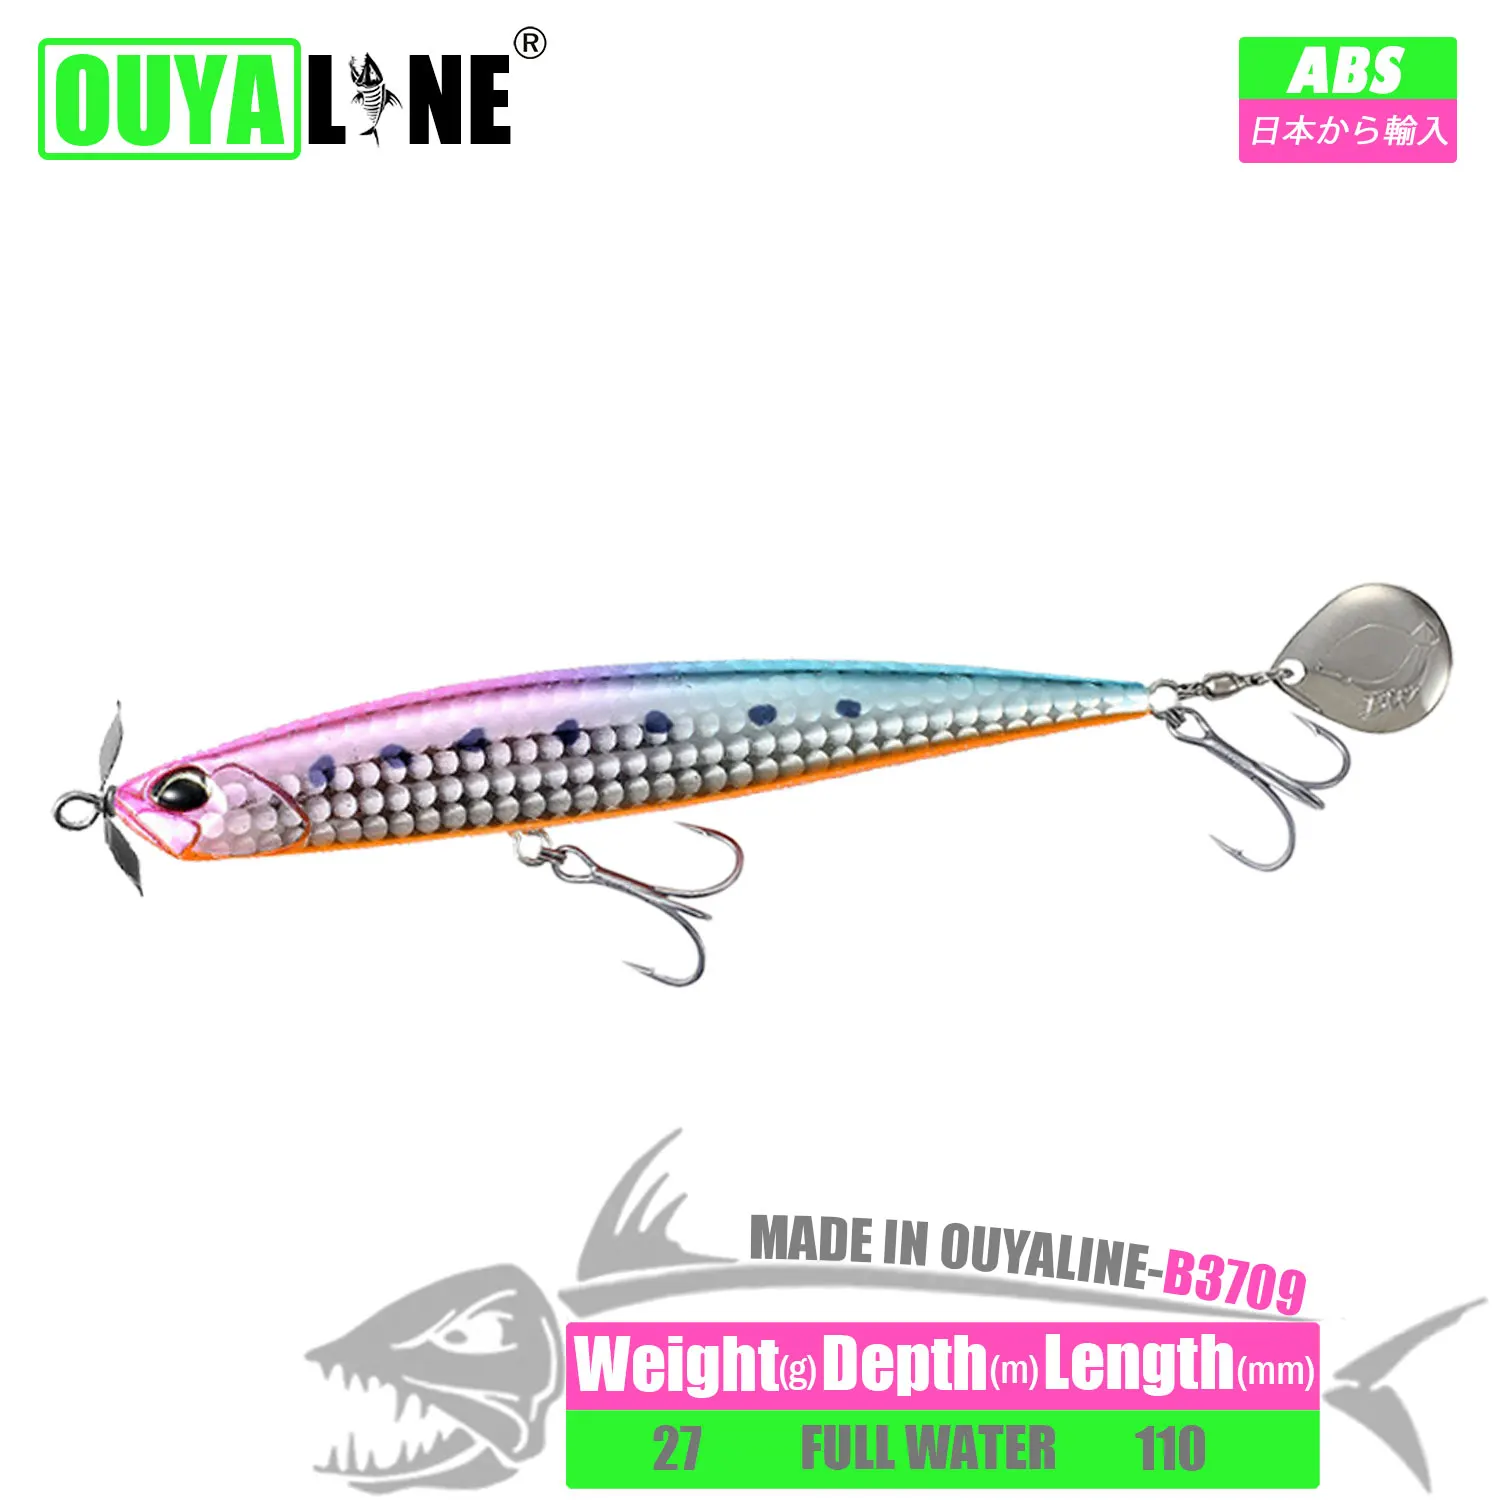 

Pencil Fishing Lure Isca Artificial Weights 27g 11cm Sinking Baits Kit Pesca Spoon Articulos Peche A La Carpe Fish Tackle Leurre